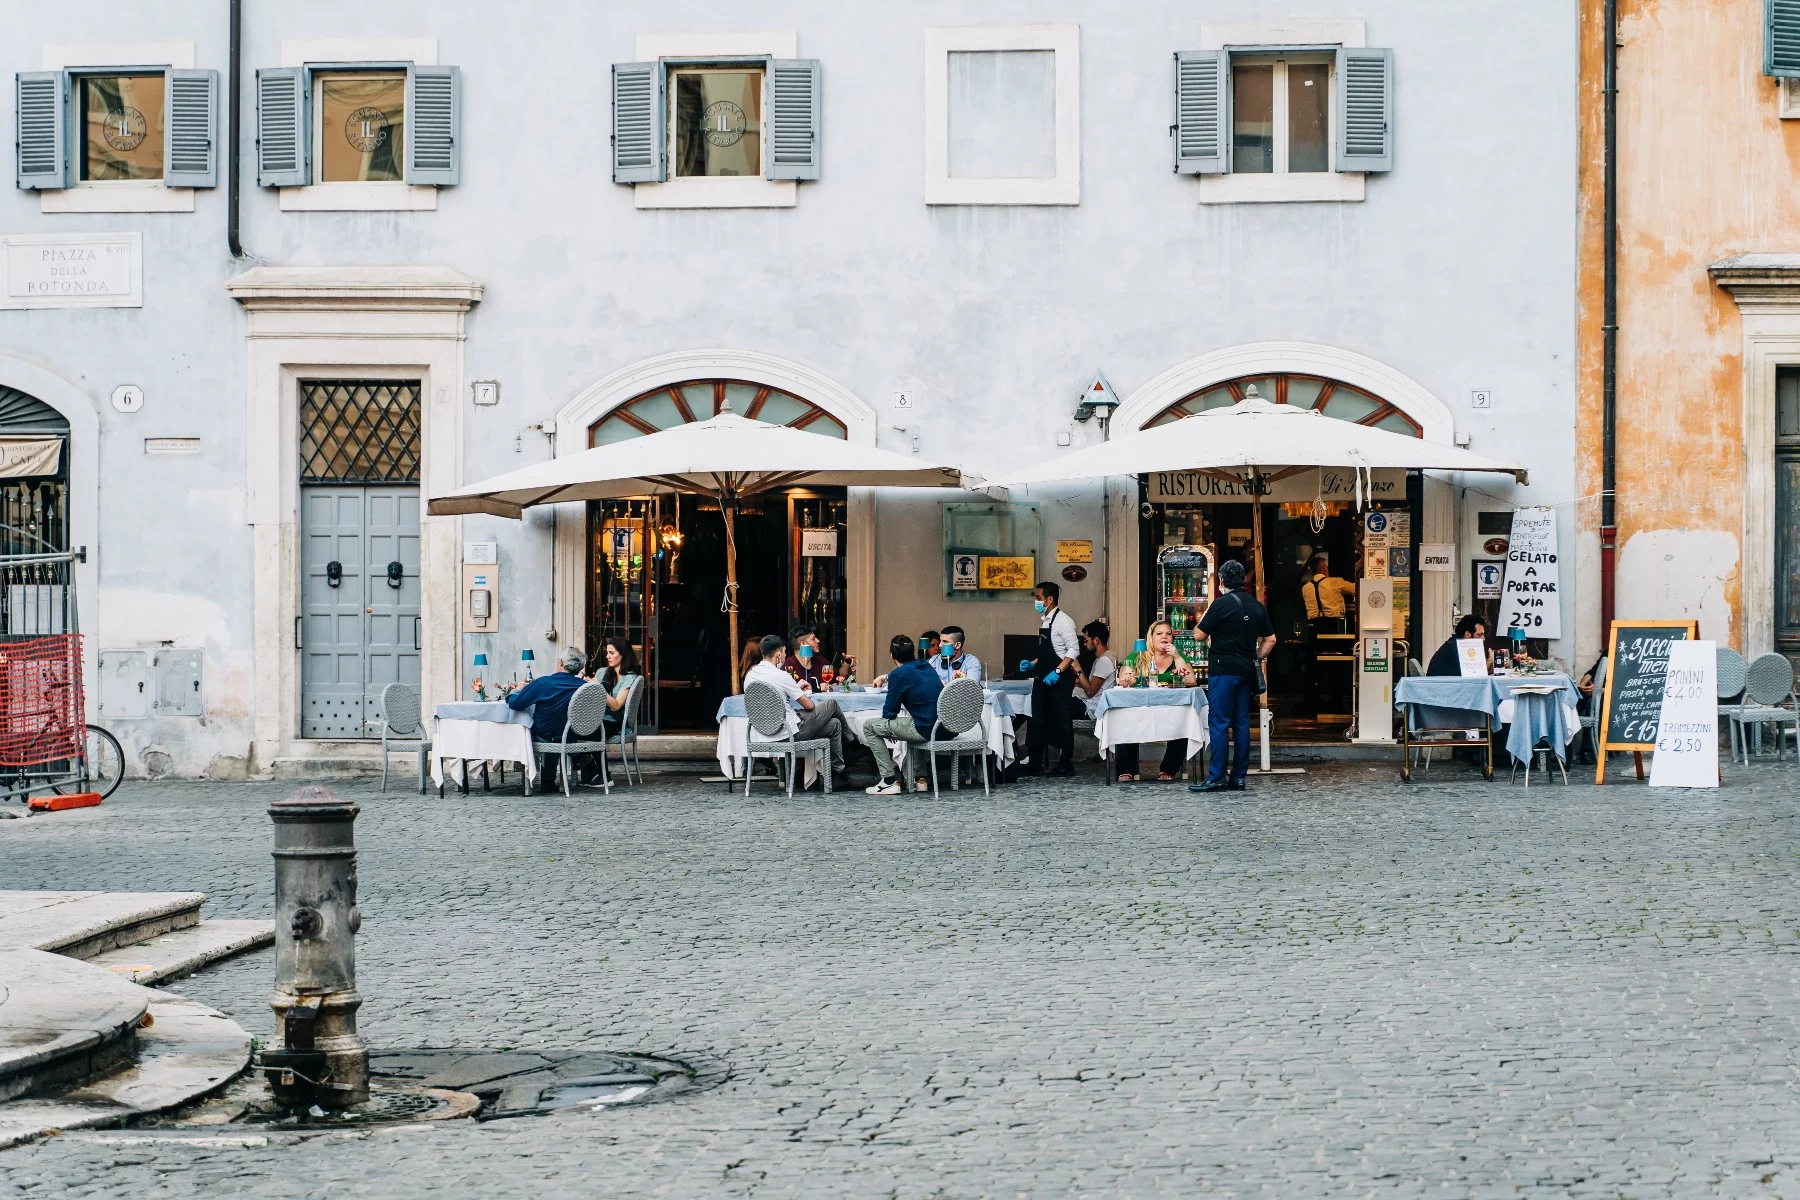 People sit at outdoor tables on a stone-paved courtyard at an Italian restaurant in Rome.